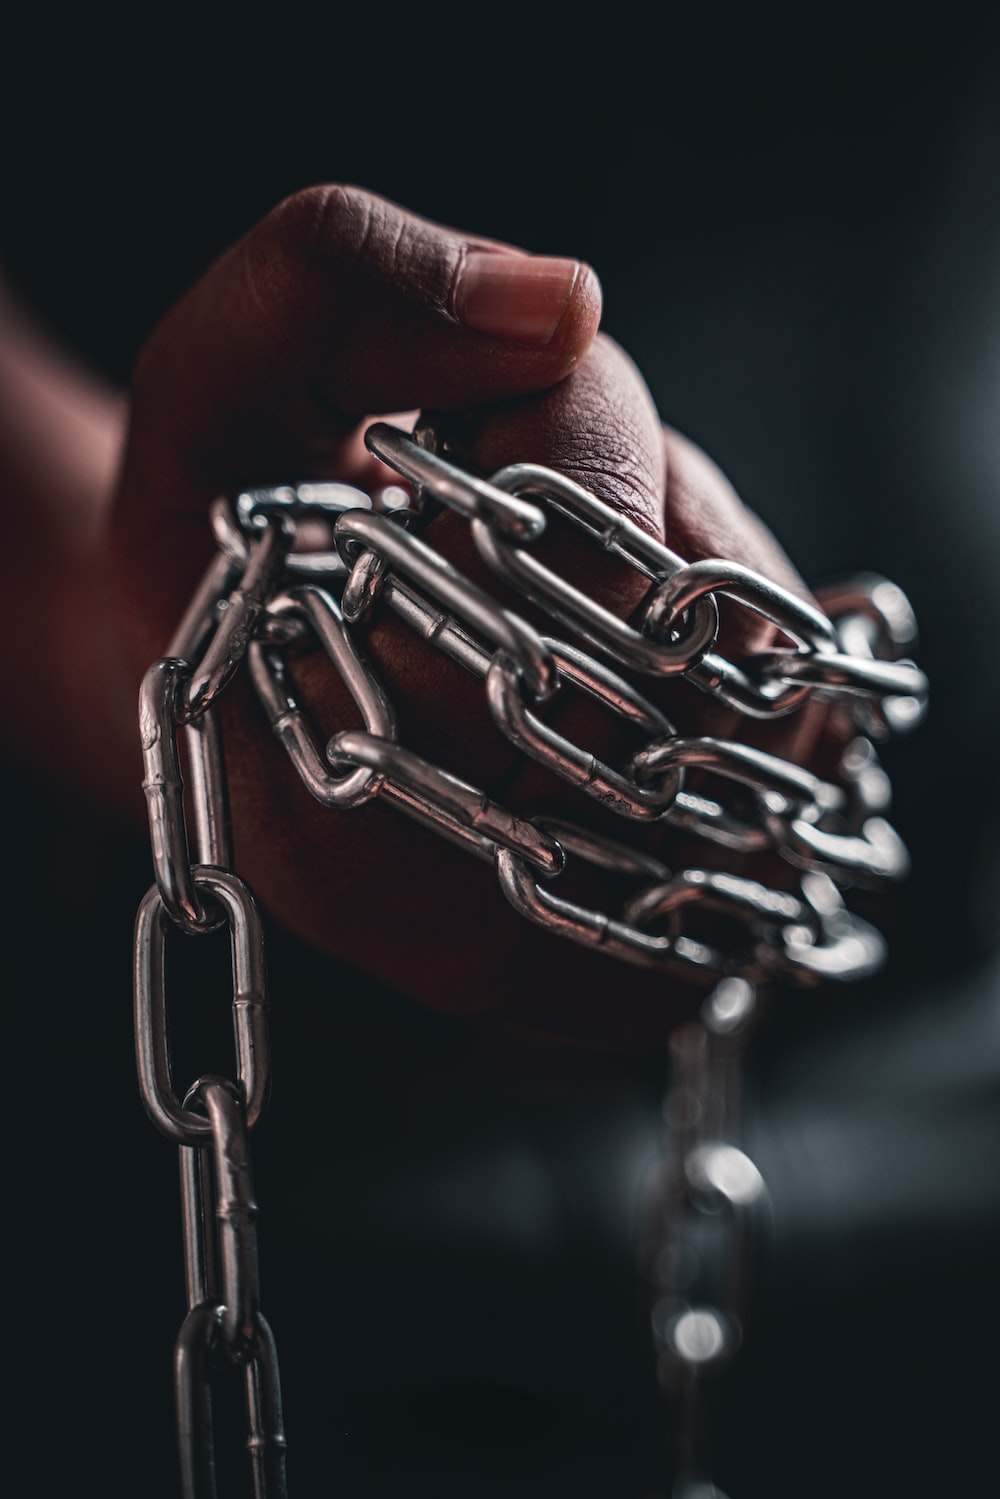 Broken Chains Picture. Download Free Image